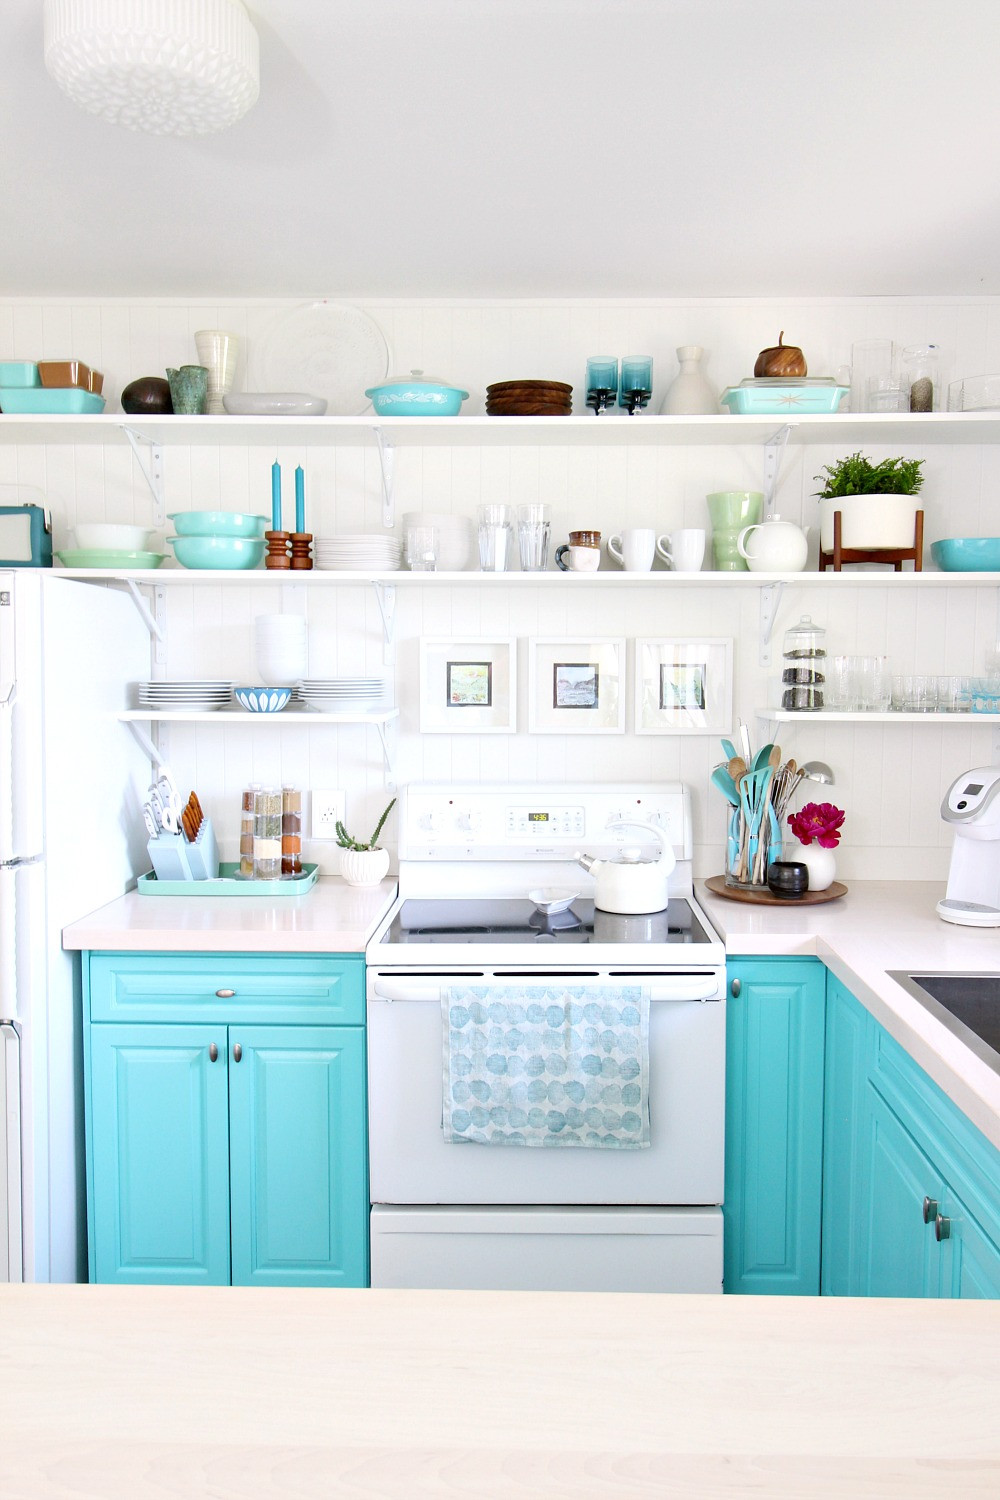 10 Stunning Mccoy Turquoise Vase 2024 free download mccoy turquoise vase of the kitchen open shelving got a fresh look dans le lakehouse in how to style kitchen open shelving